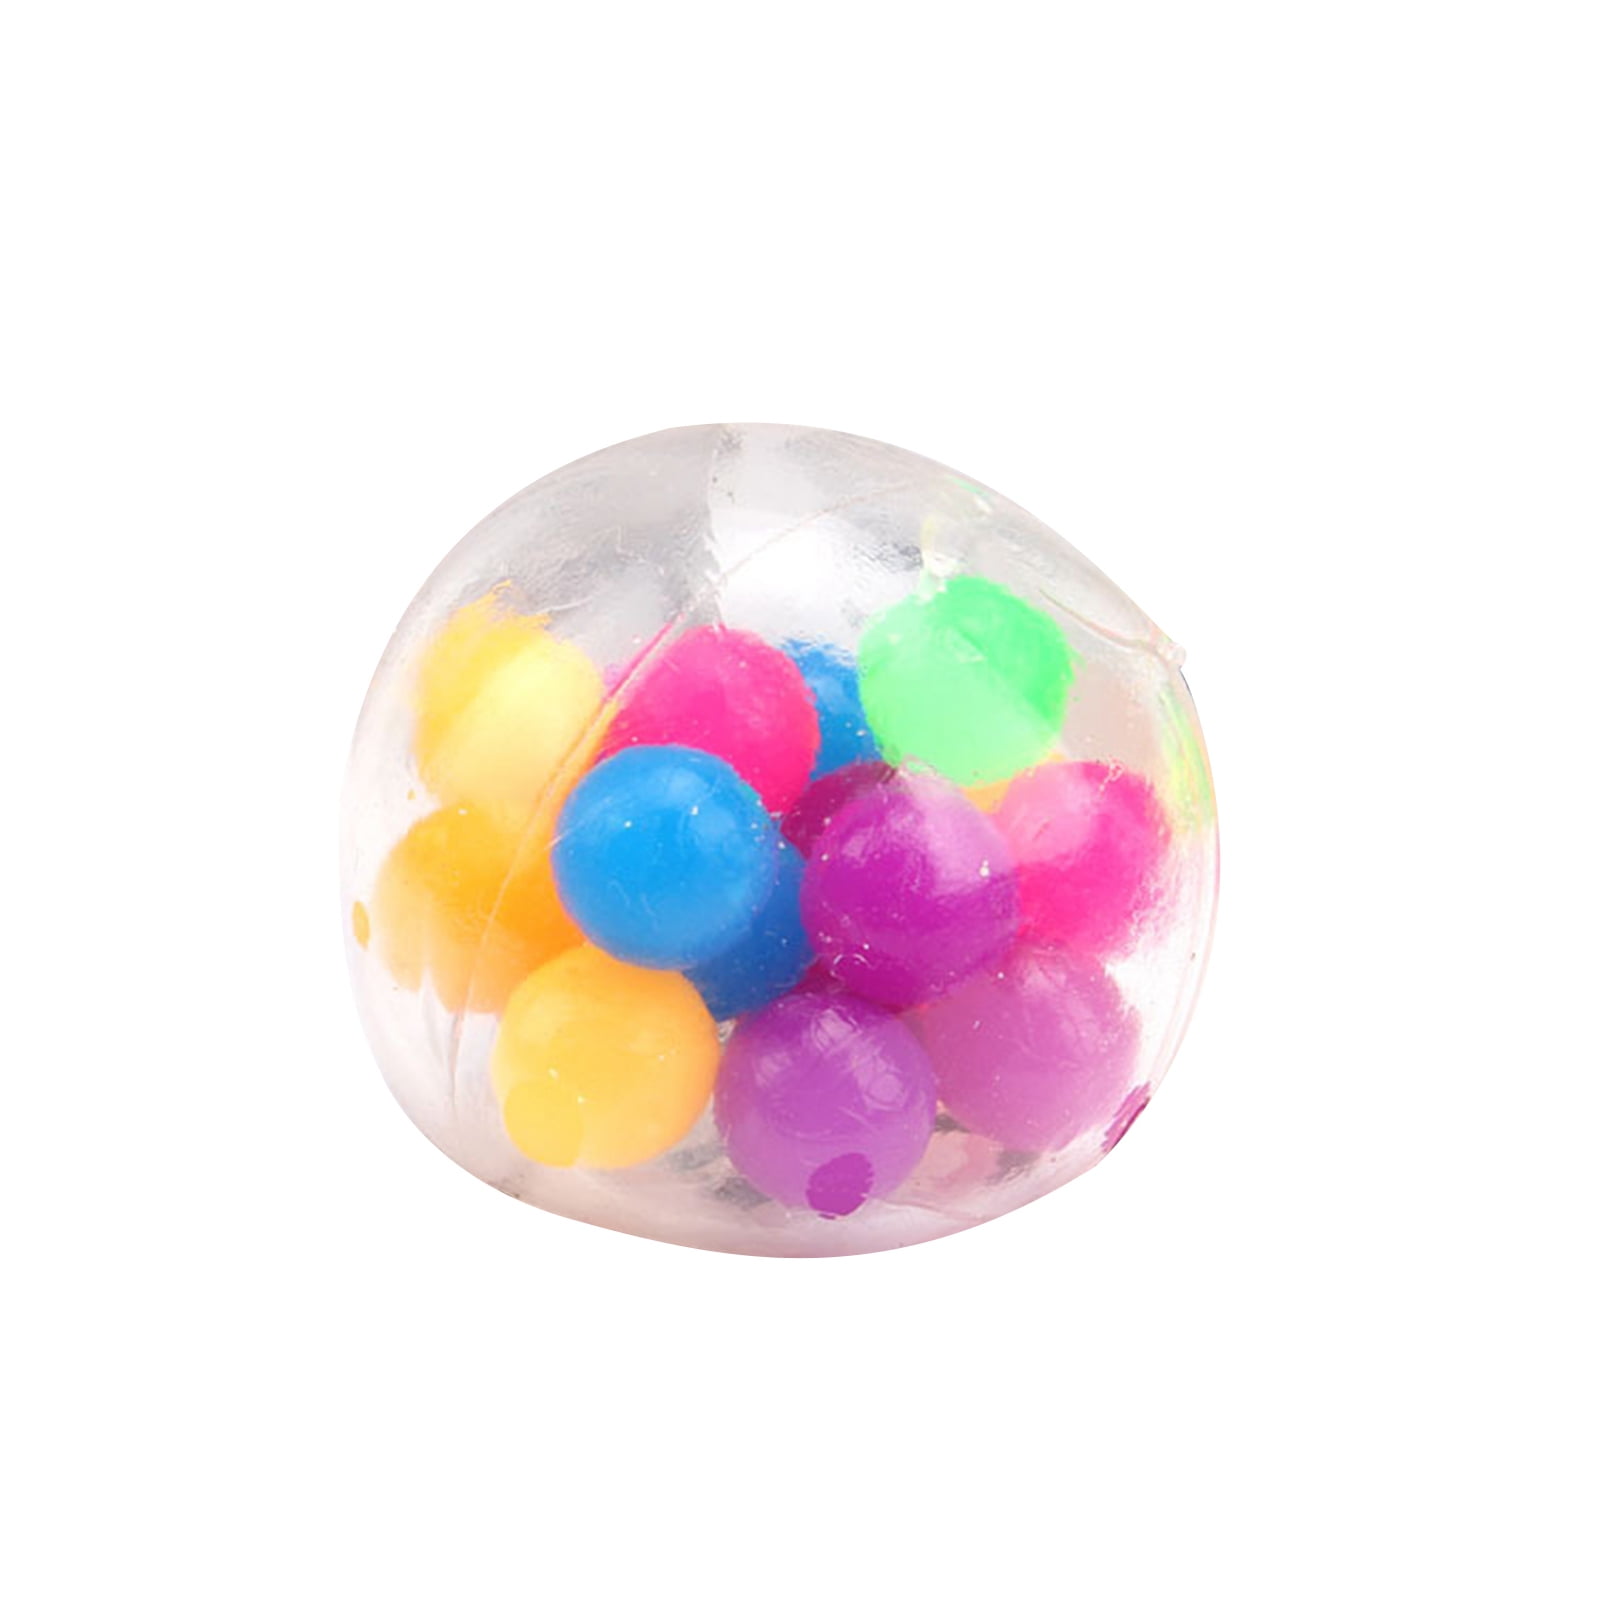 Details about   HGL FLASH SQUEEZE CONFETTI BALL SV15503 STRESS RELIEVER SQUEEZE TOY COLOURFUL 